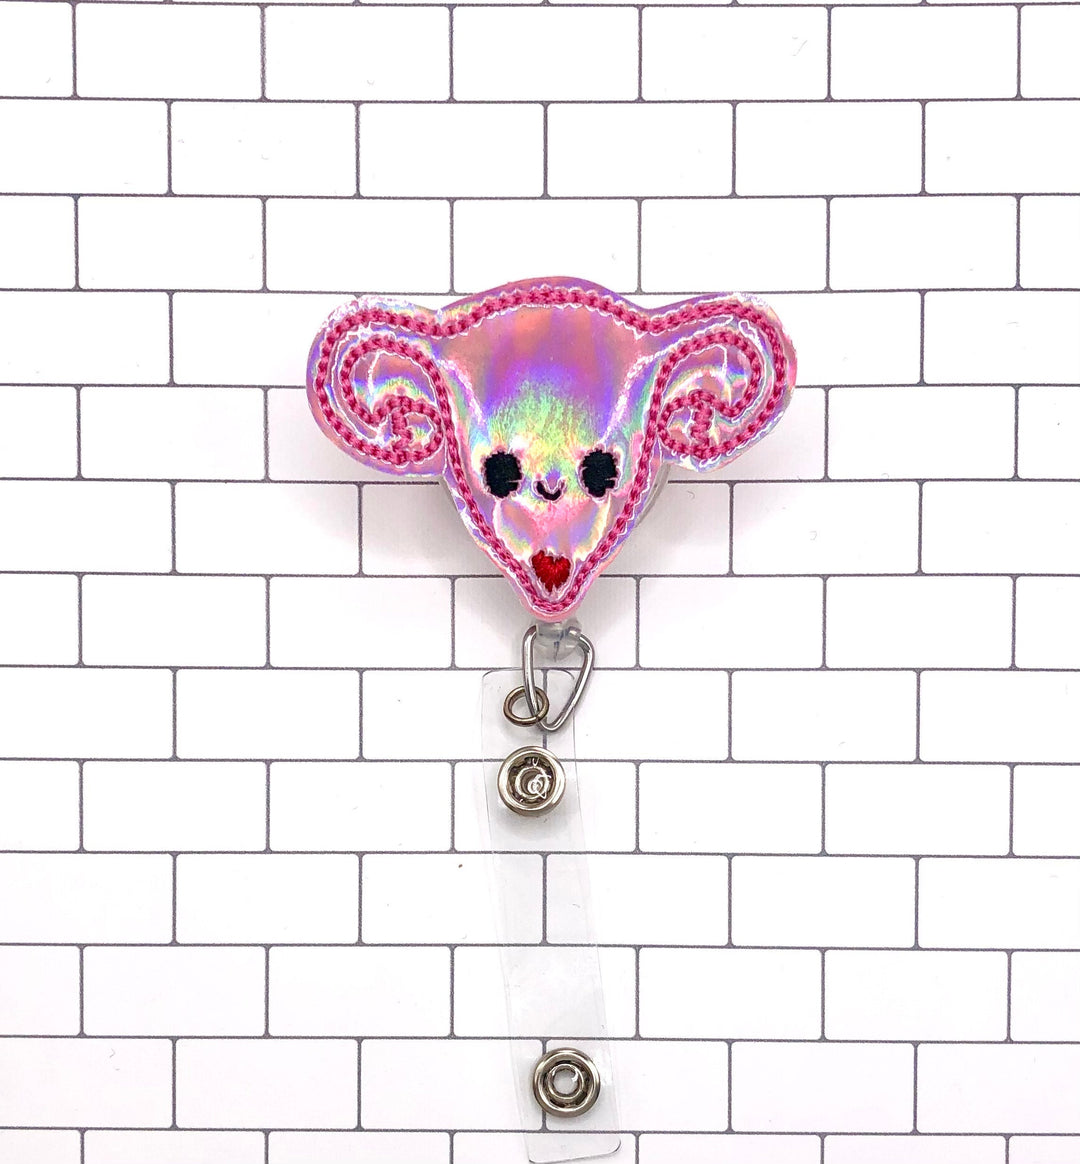 Uterus Badge Reel, Labor and Delivery Badge Reel, Thank You Gifts, OBGYN Gifts,